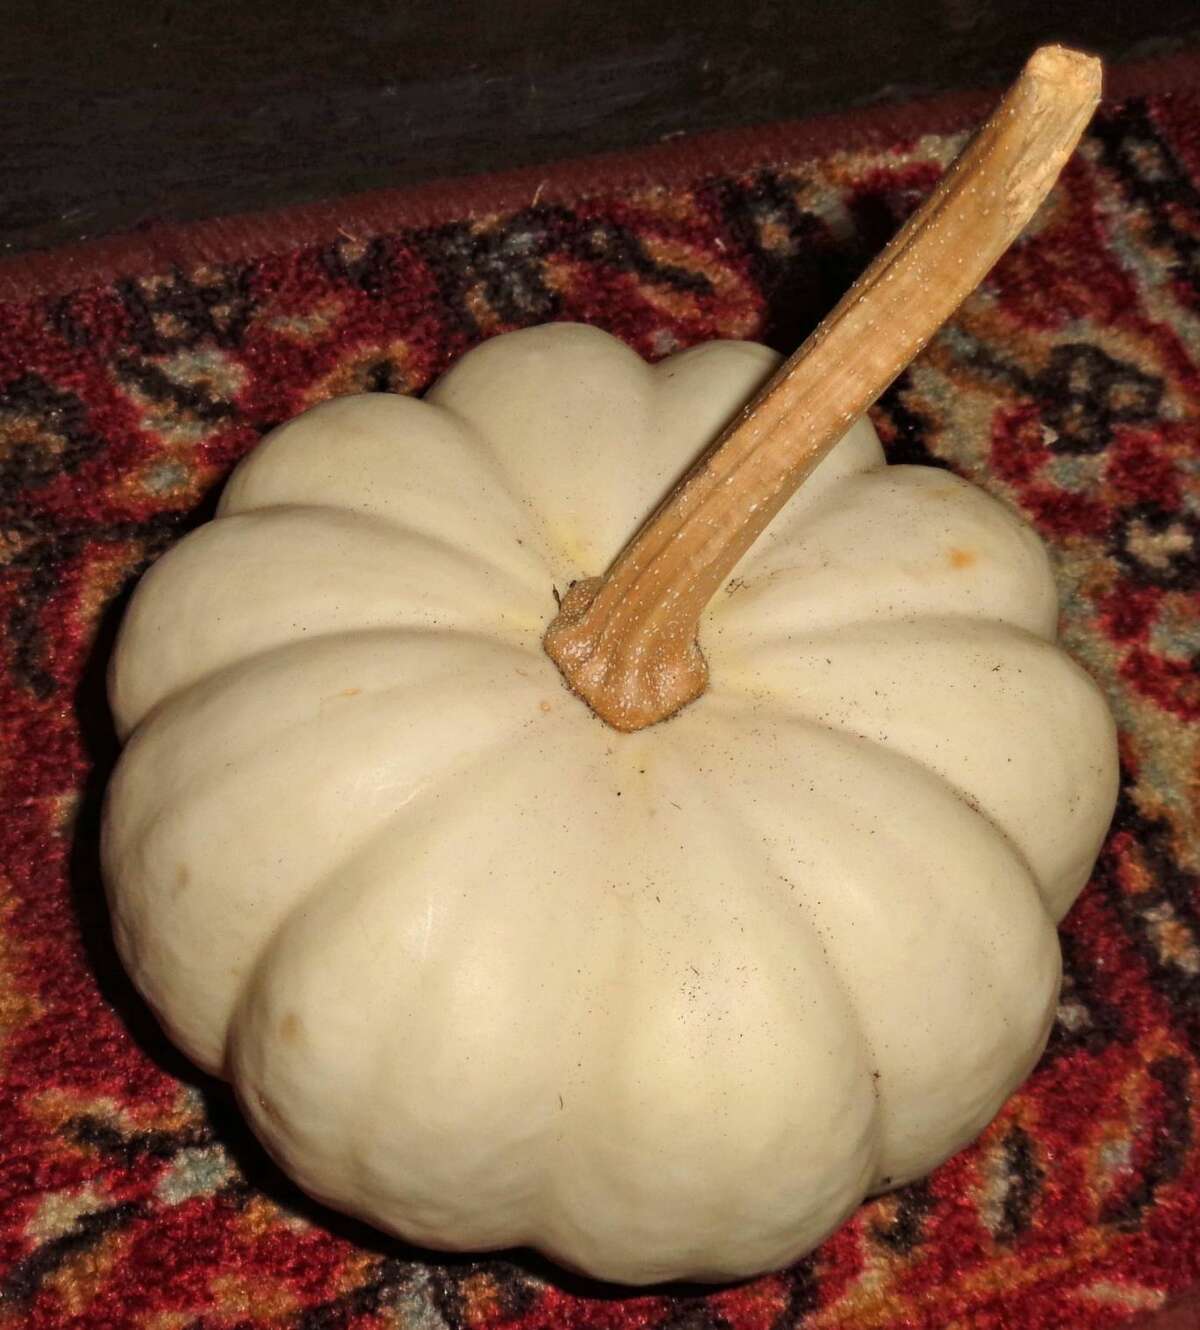 “When I opened my take-out bag, on top of the food container was an eerie white pumpkin. I like to decorate with gourds in the Fall, but I had not seen anything like that at the bar. When I sent Marilyn a message, her response was ‘It’s from the ghost.’ ”